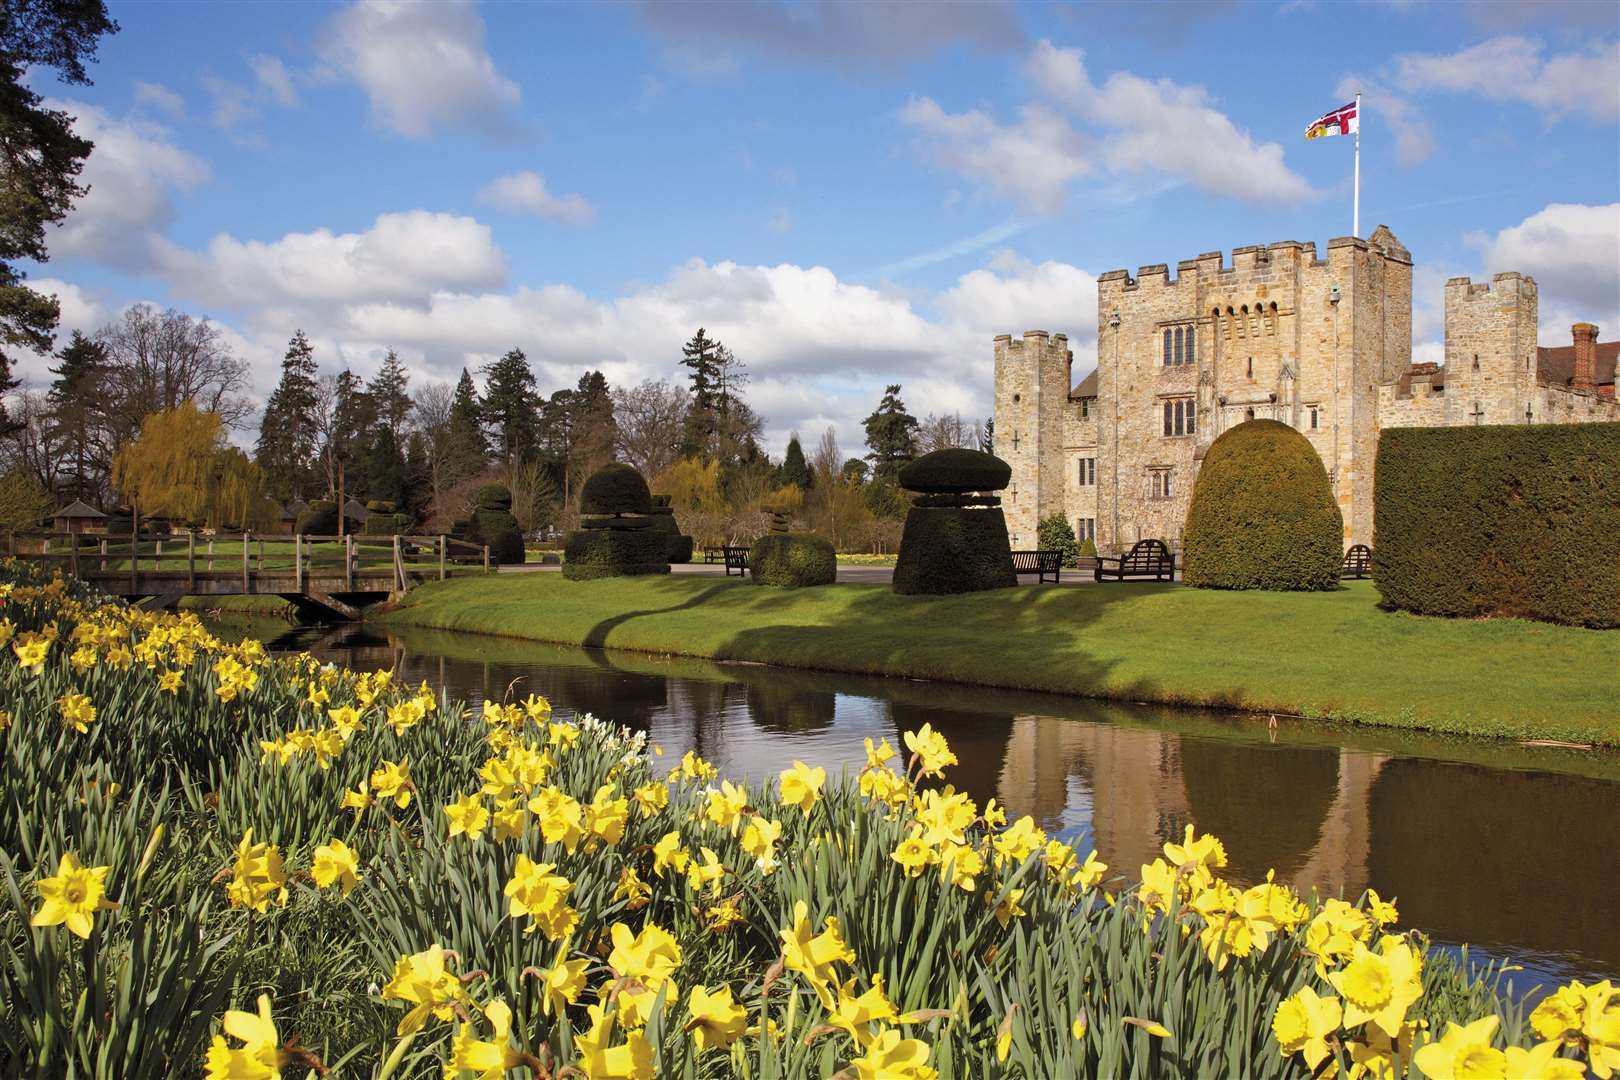 The spring flowers will be in bloom at Hever Castle. Picture: Hever Castle and Gardens